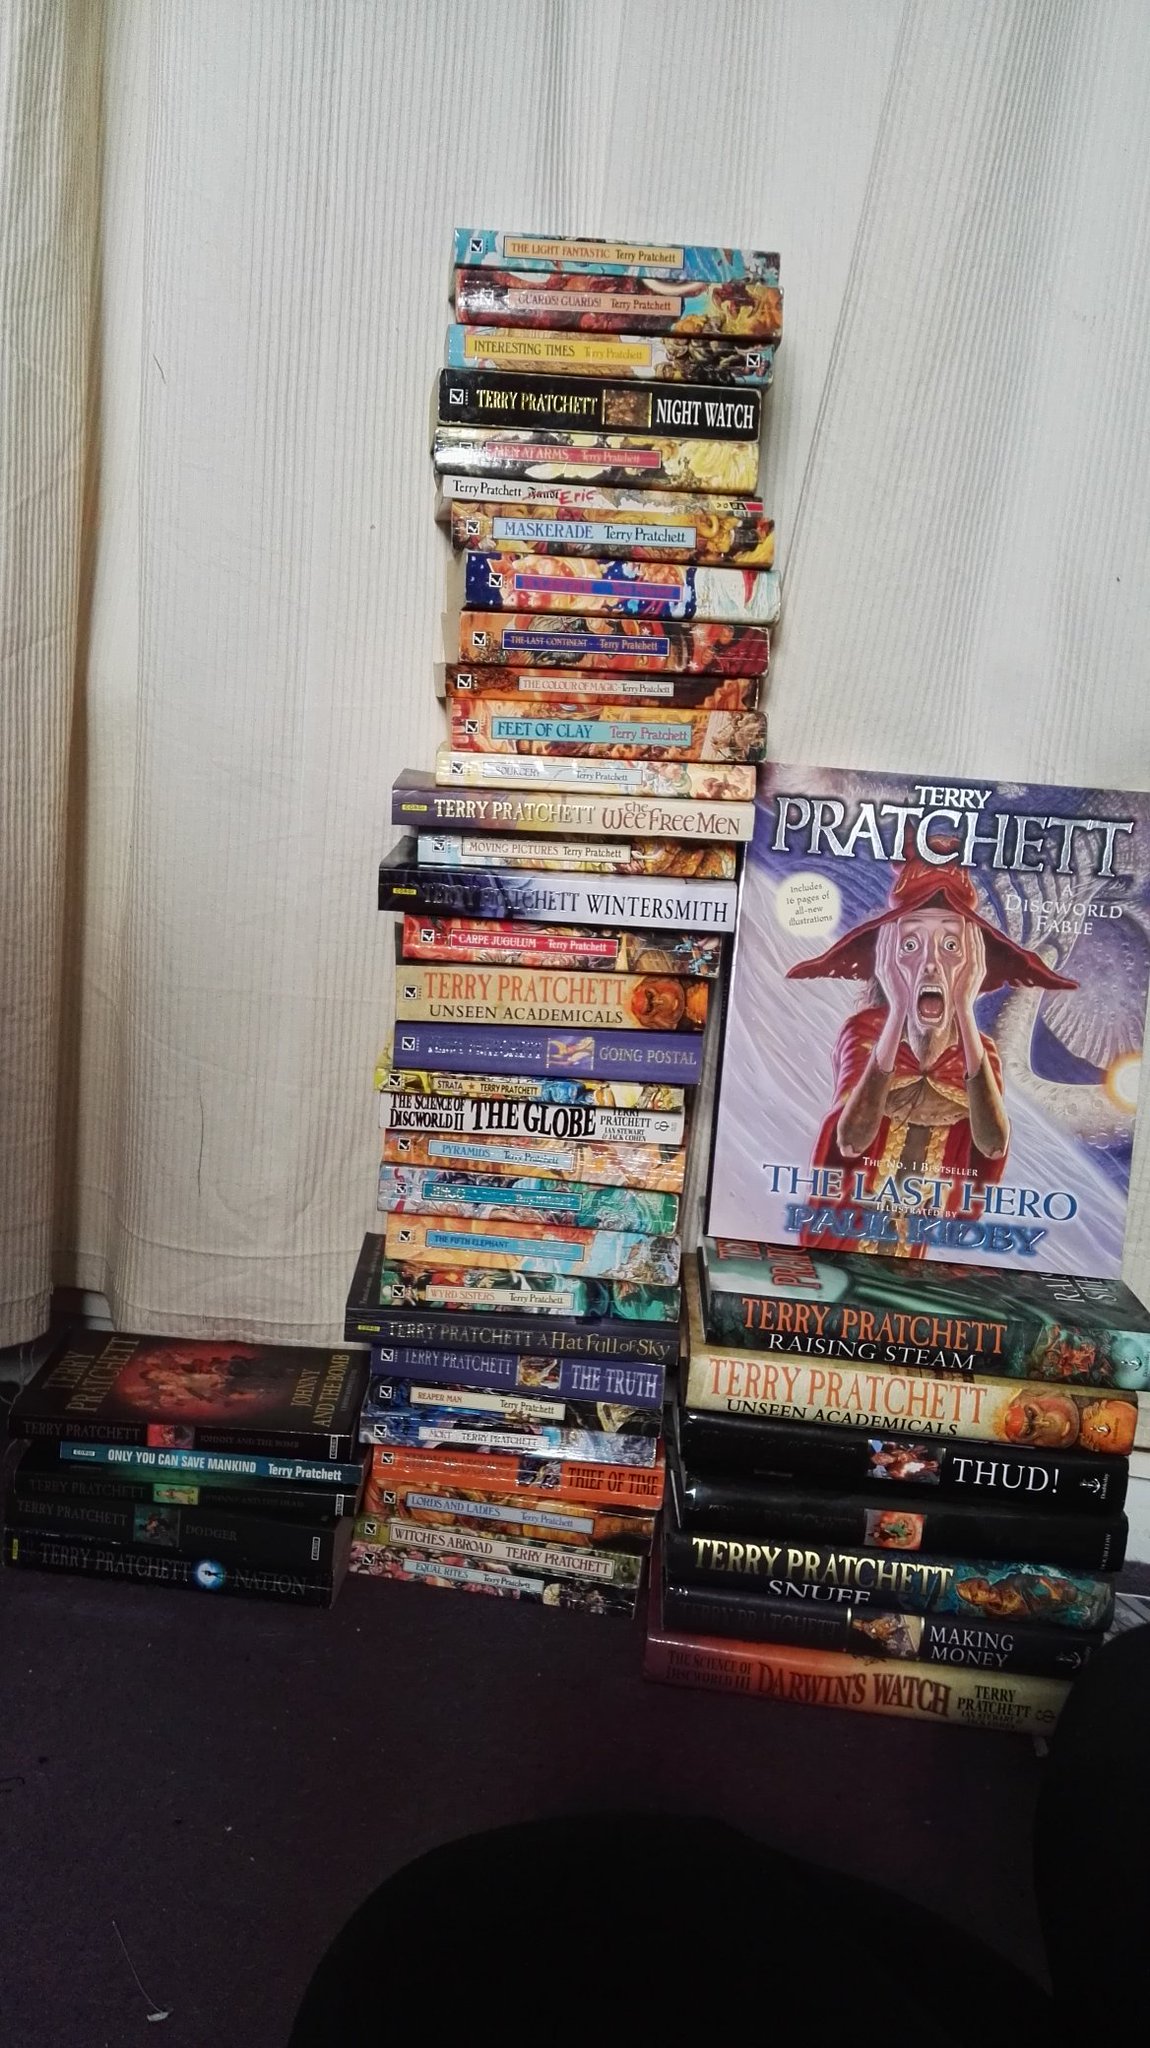  Happy birthday, Sir Terry Pratchett. Your works still bring me joy even after your passing. 